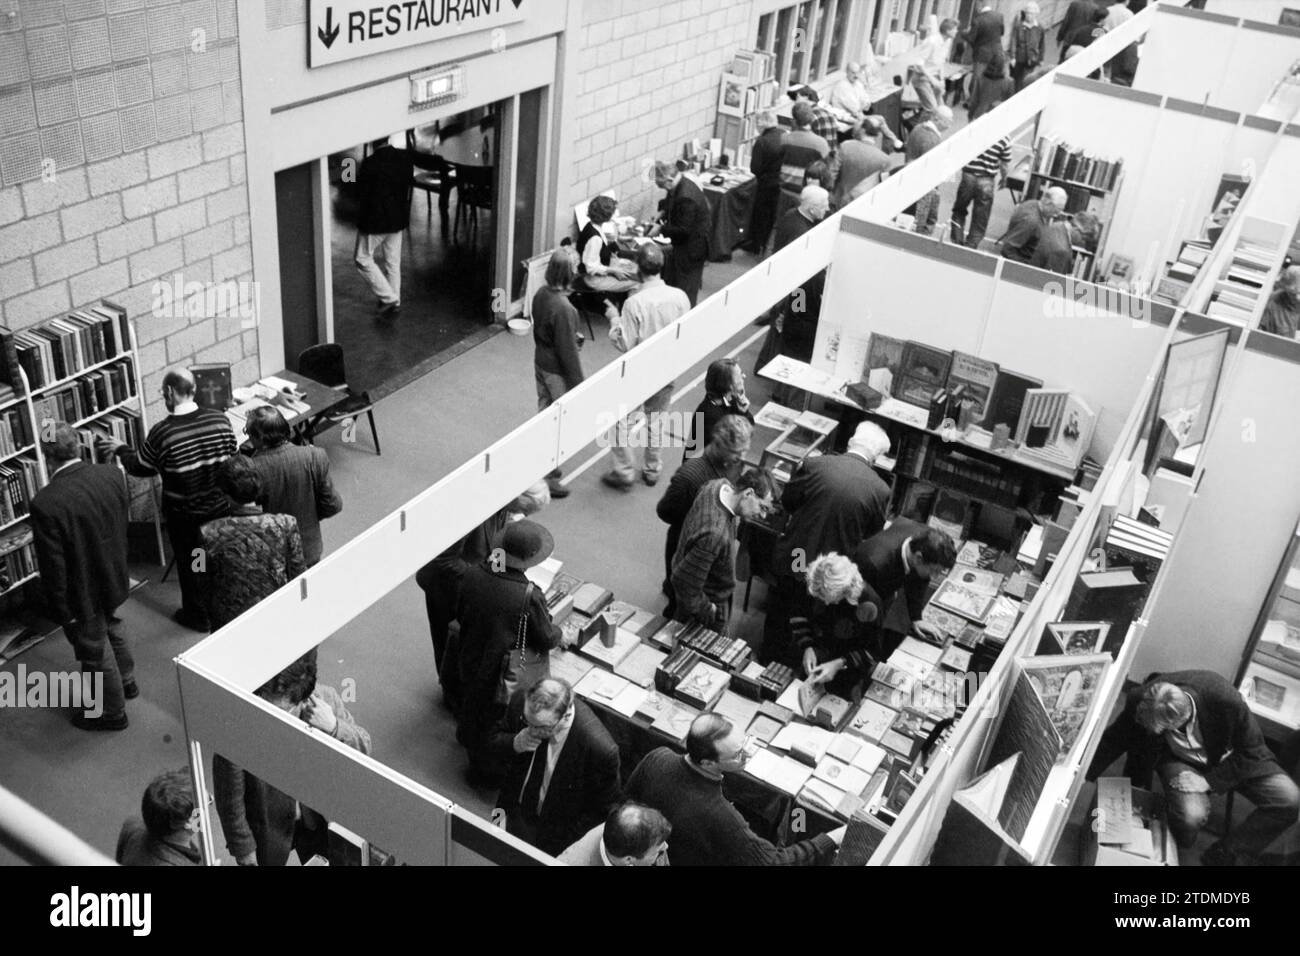 Opening of antiquarian fair, Haarlem, The Netherlands, 24-11-1994, Whizgle News from the Past, Tailored for the Future. Explore historical narratives, Dutch The Netherlands agency image with a modern perspective, bridging the gap between yesterday's events and tomorrow's insights. A timeless journey shaping the stories that shape our future Stock Photo